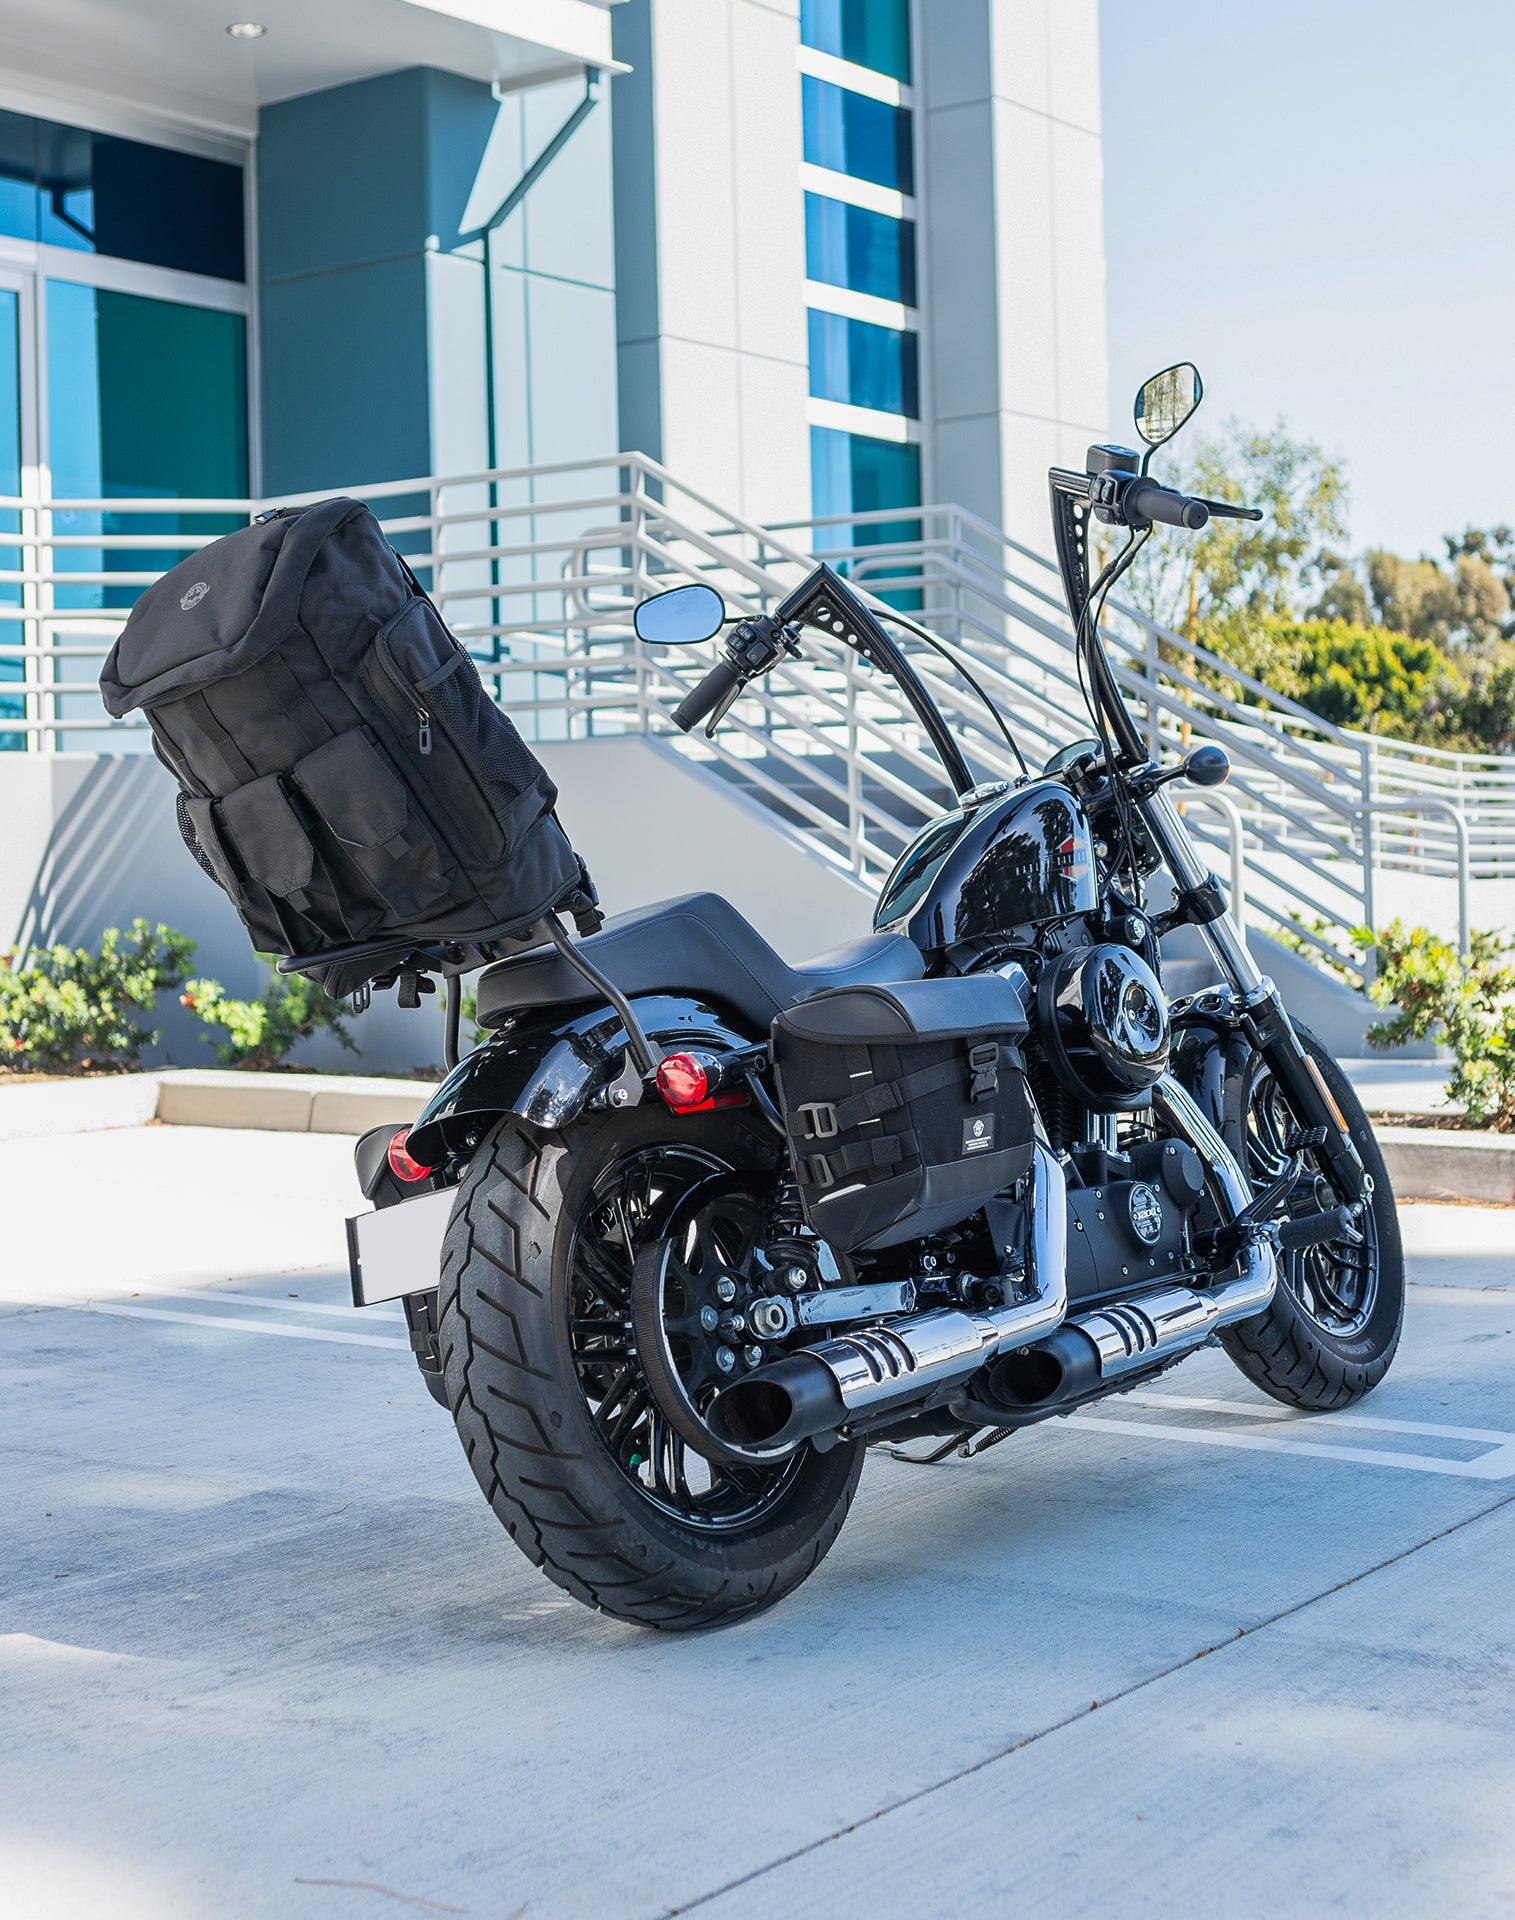 32L - Trident Large Triumph Motorcycle Tail Bag